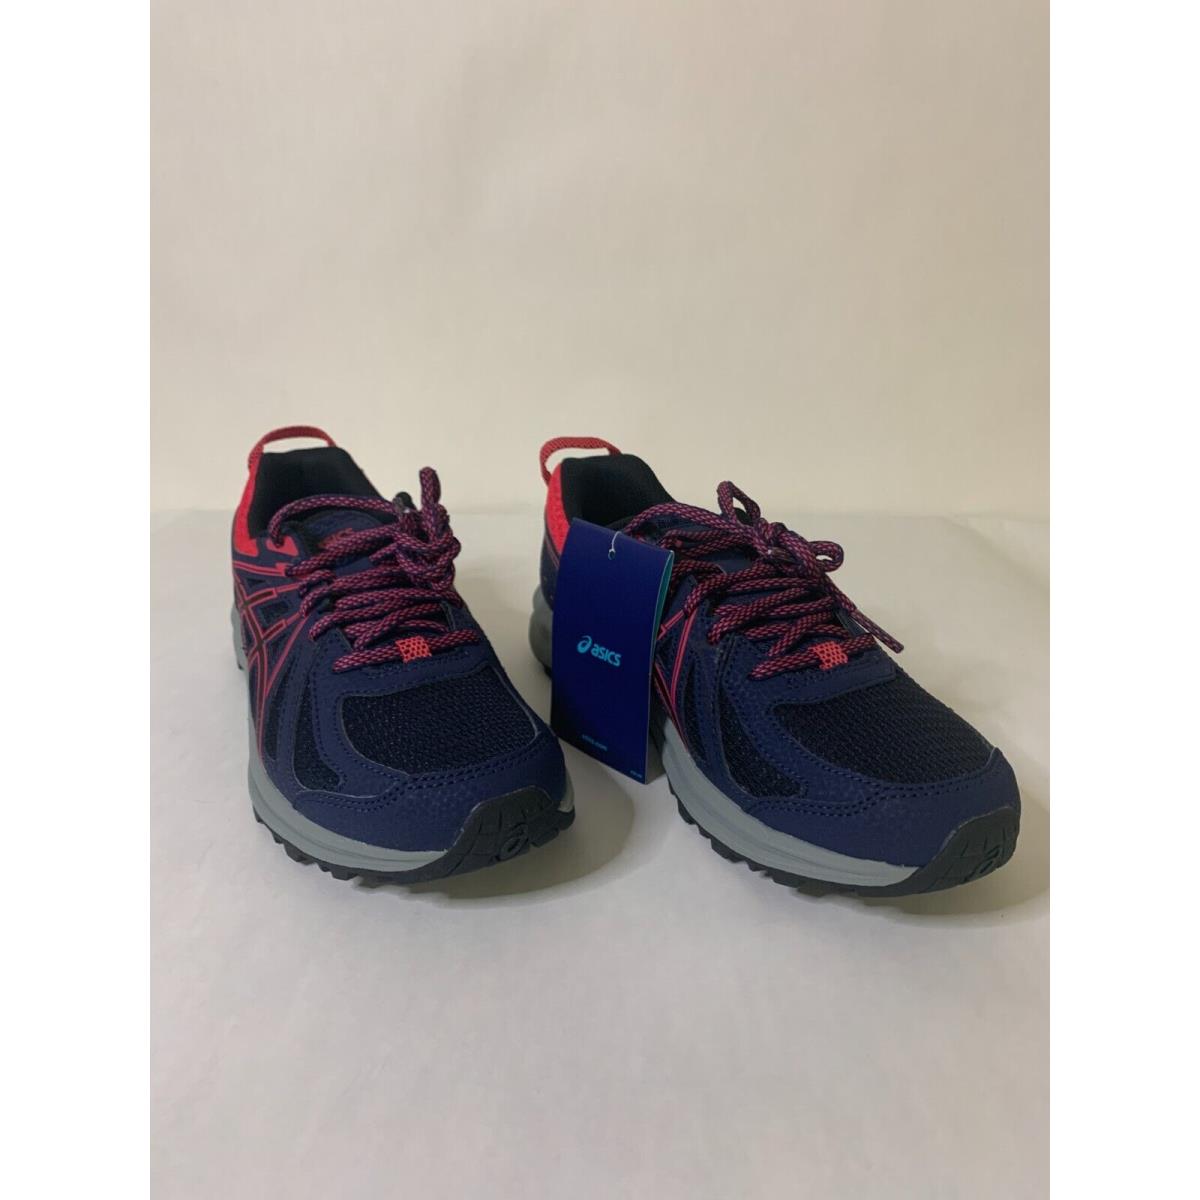 Asics Women`s Frequent Trail Running Shoes Peacoat/pixel Pink Size 6 B